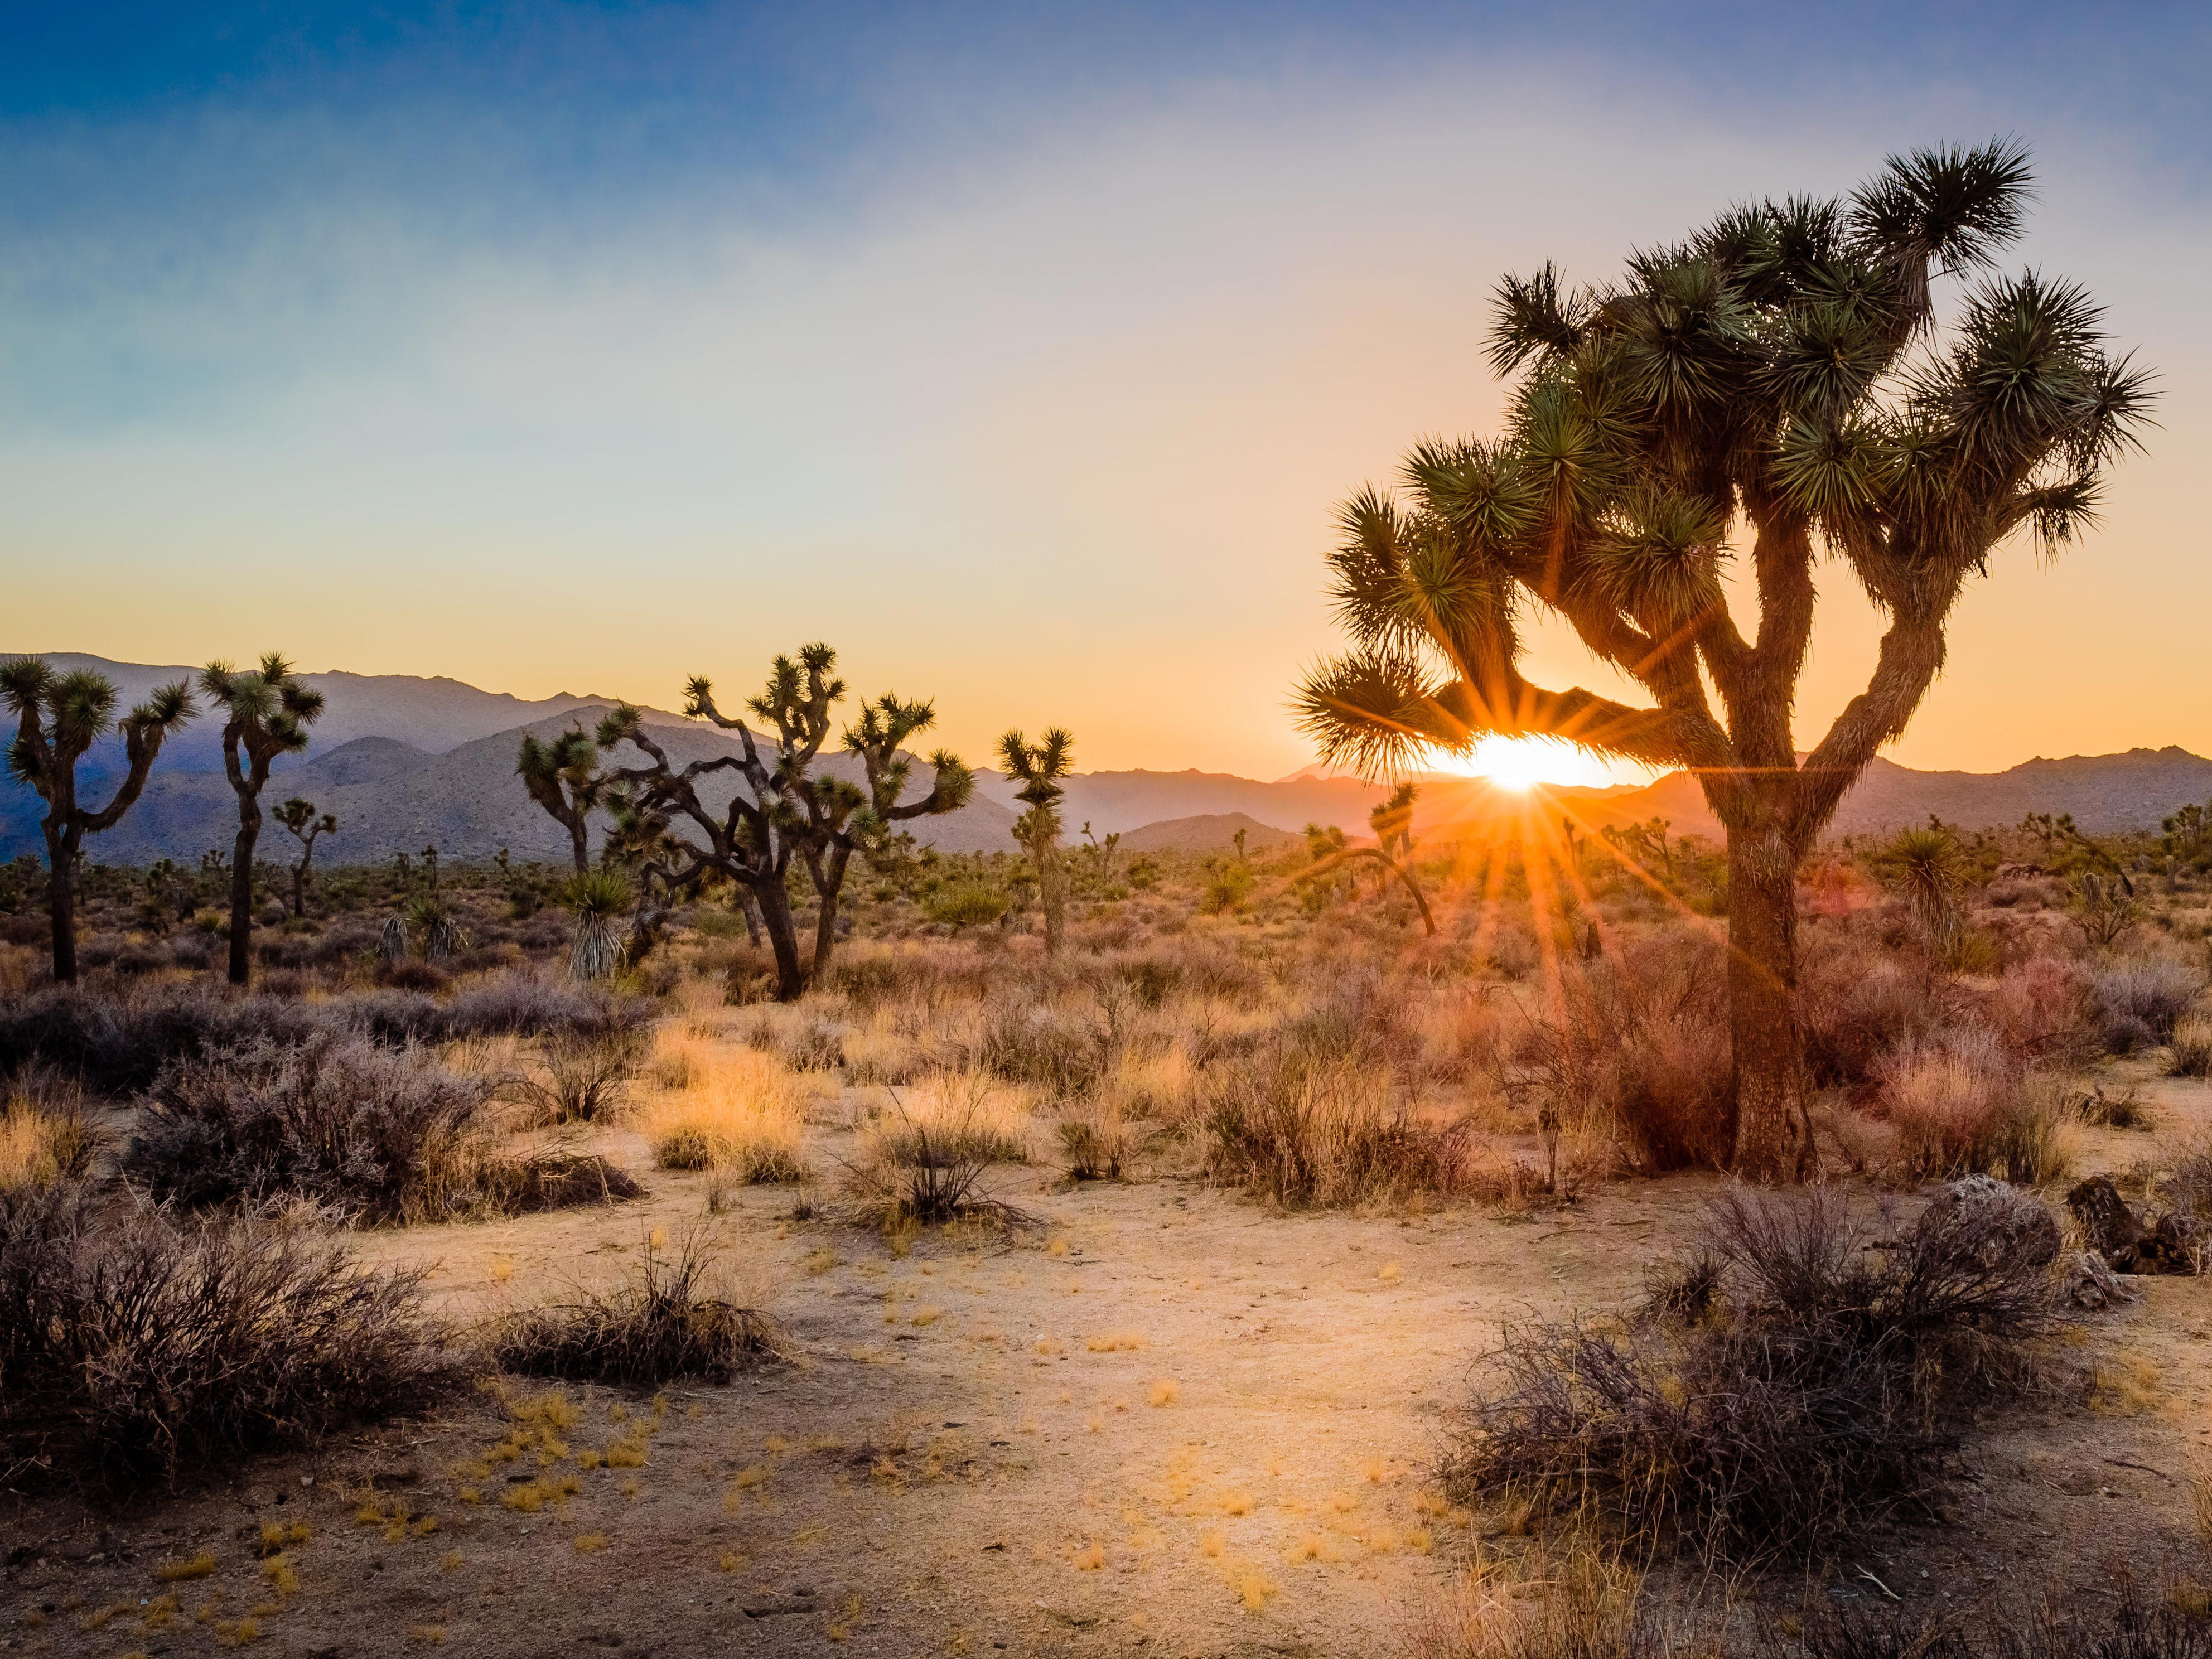 <p>In the same vein, Matt and Karen would advise against visiting <a href="https://www.businessinsider.com/staying-in-dome-house-california-desert-cheap-joshua-tree-airbnb-2024-4">Joshua Tree National Park</a> in the summer as it can get "brutally hot."</p><p>Instead, they say the best time to go is January and February when temperatures are cooler. </p><p>When you arrive, they suggest trekking their favorite hike, the Panorama Loop, which they say is less crowded and offers great views.</p>